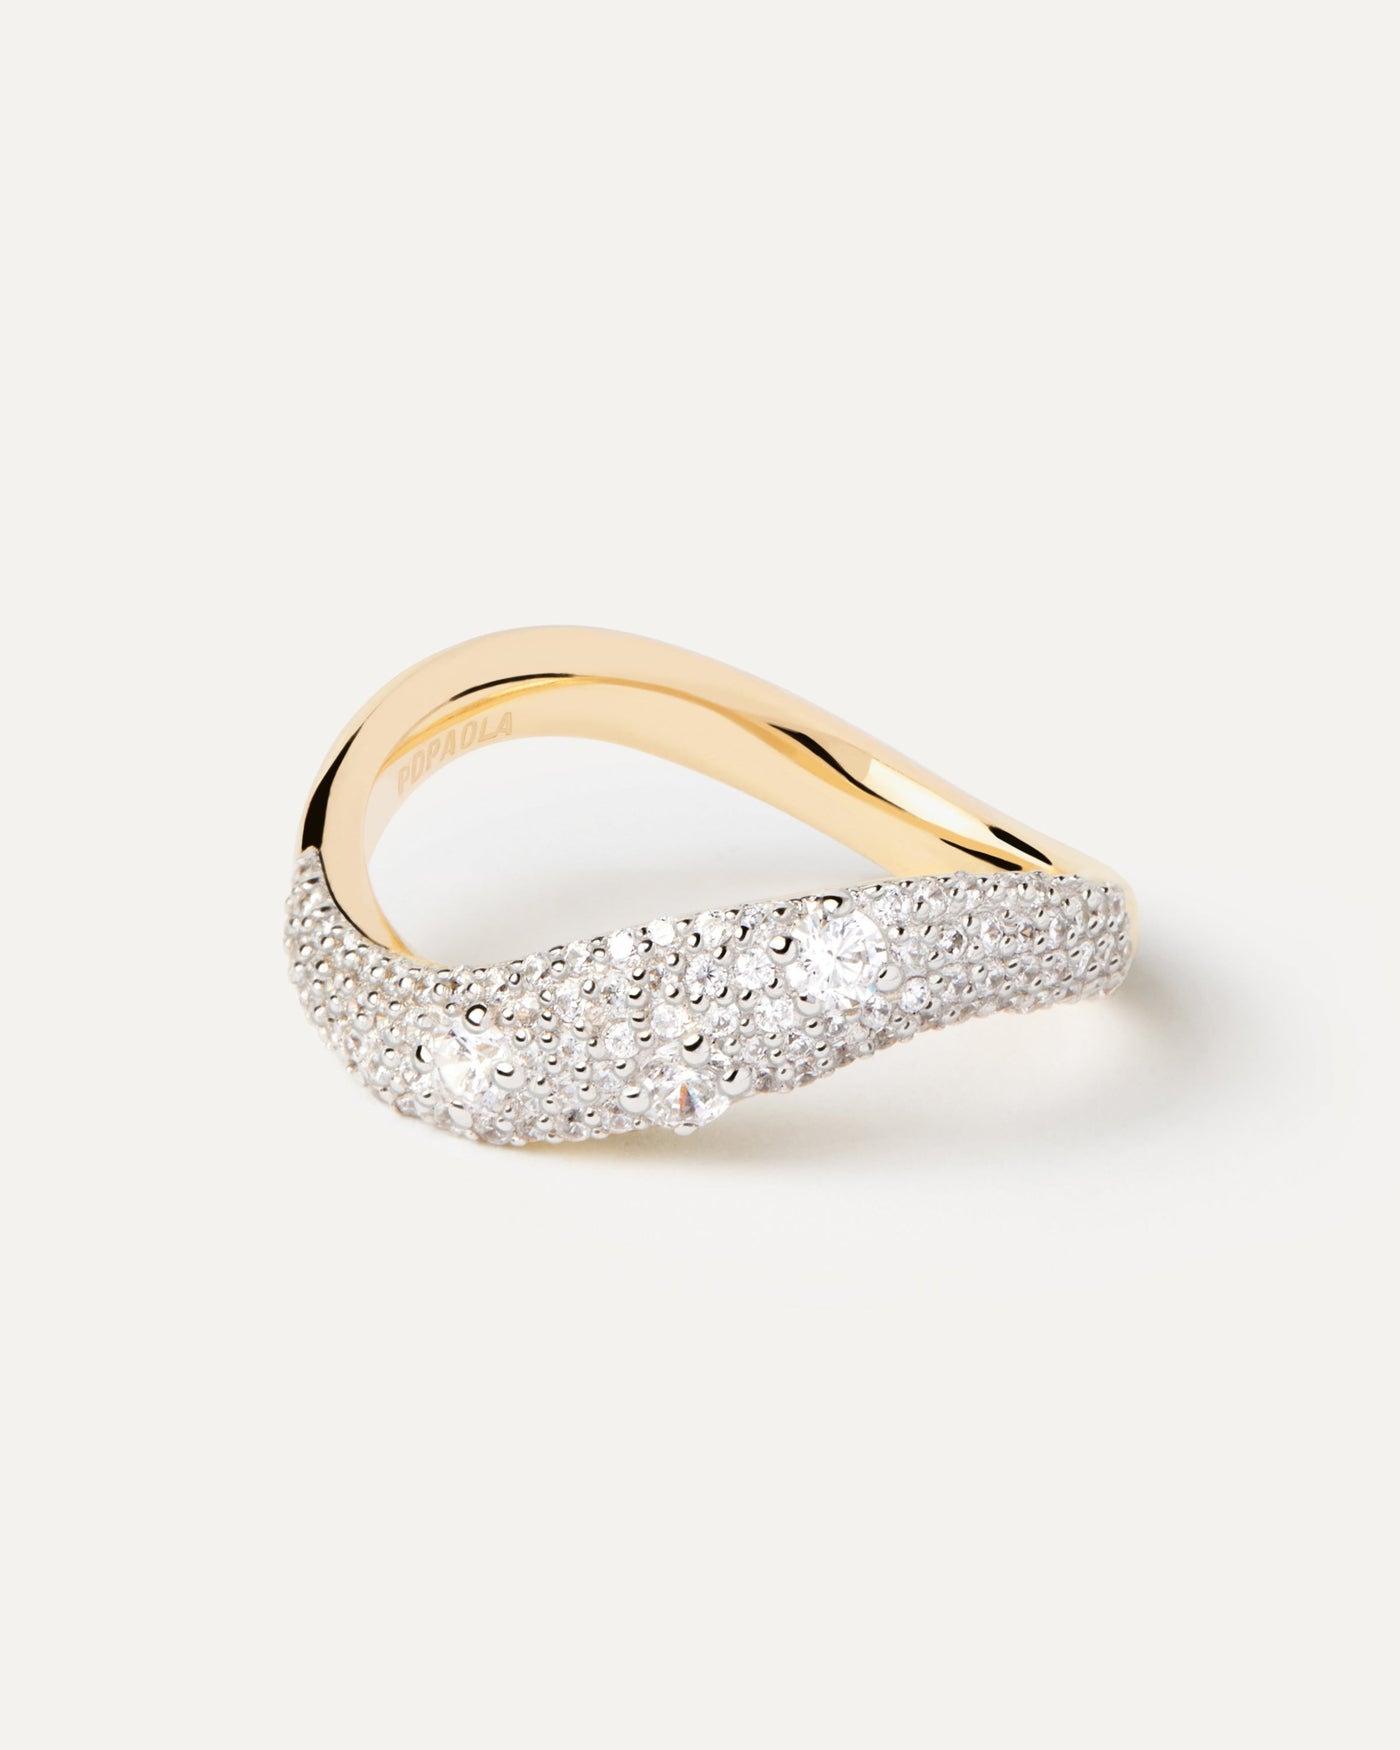 2023 Selection | Diamonds And Gold Apollo Ring. Anillo pavé ondulado de oro amarillo con 92 diamantes de laboratorio de 0,62 quilates. Get the latest arrival from PDPAOLA. Place your order safely and get this Best Seller. Free Shipping.